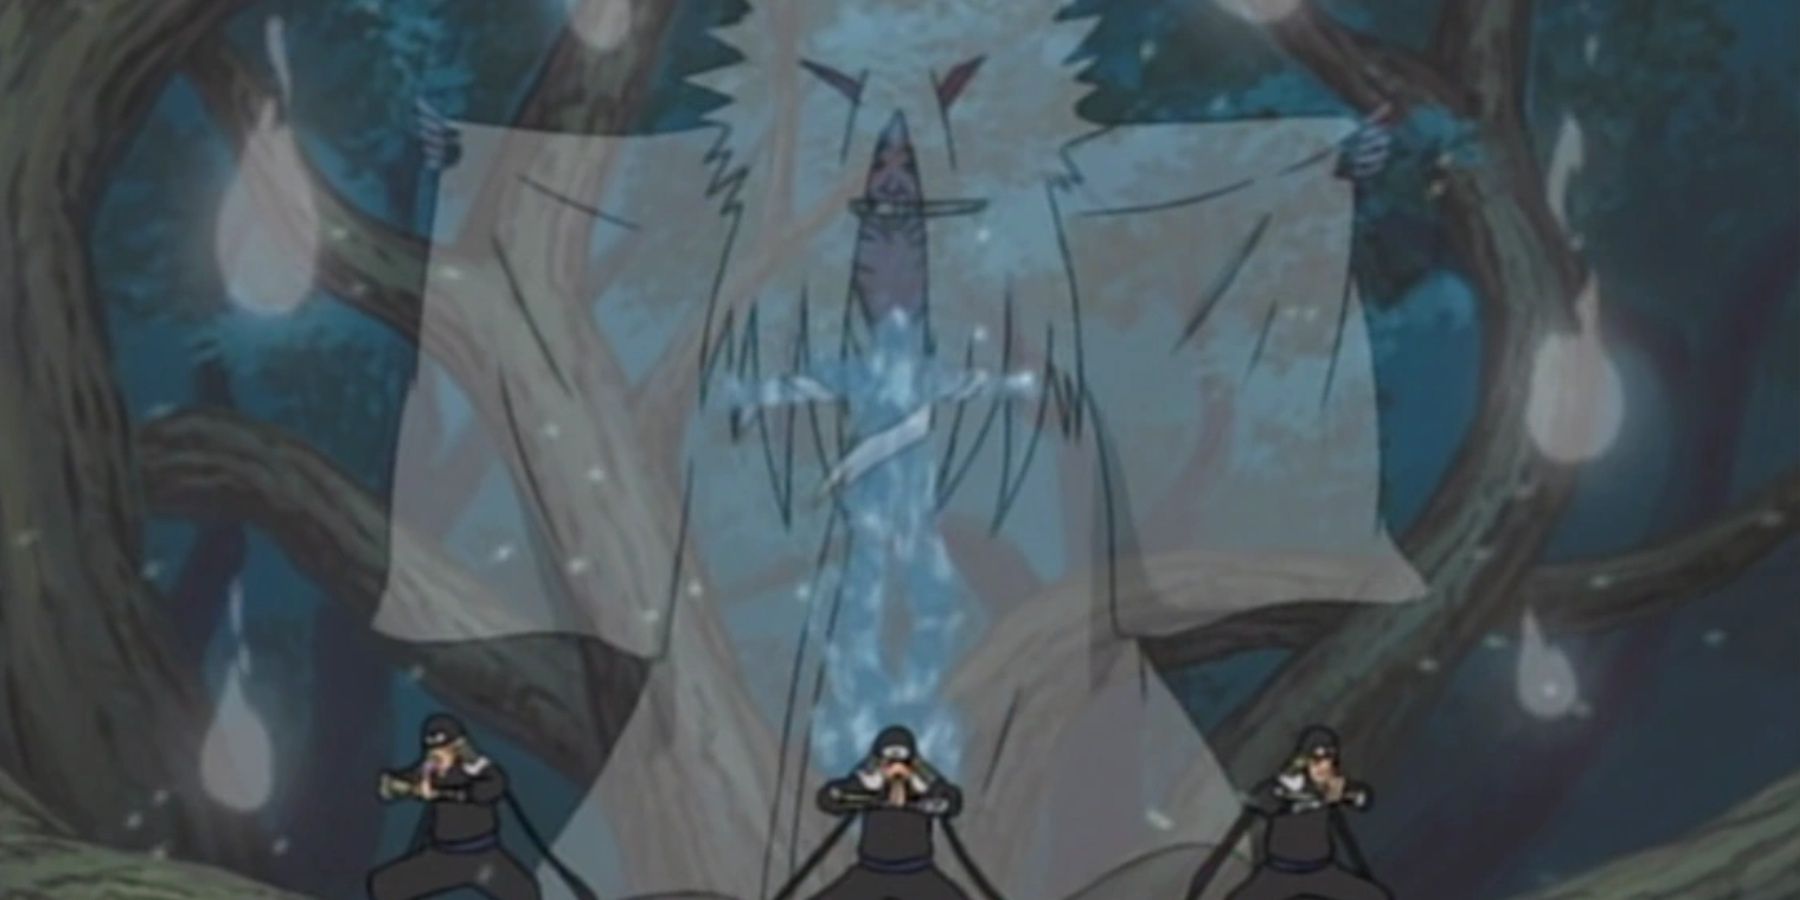 The 3rd Hokage using the Reaper Death Seal against Orochimaru in Naruto